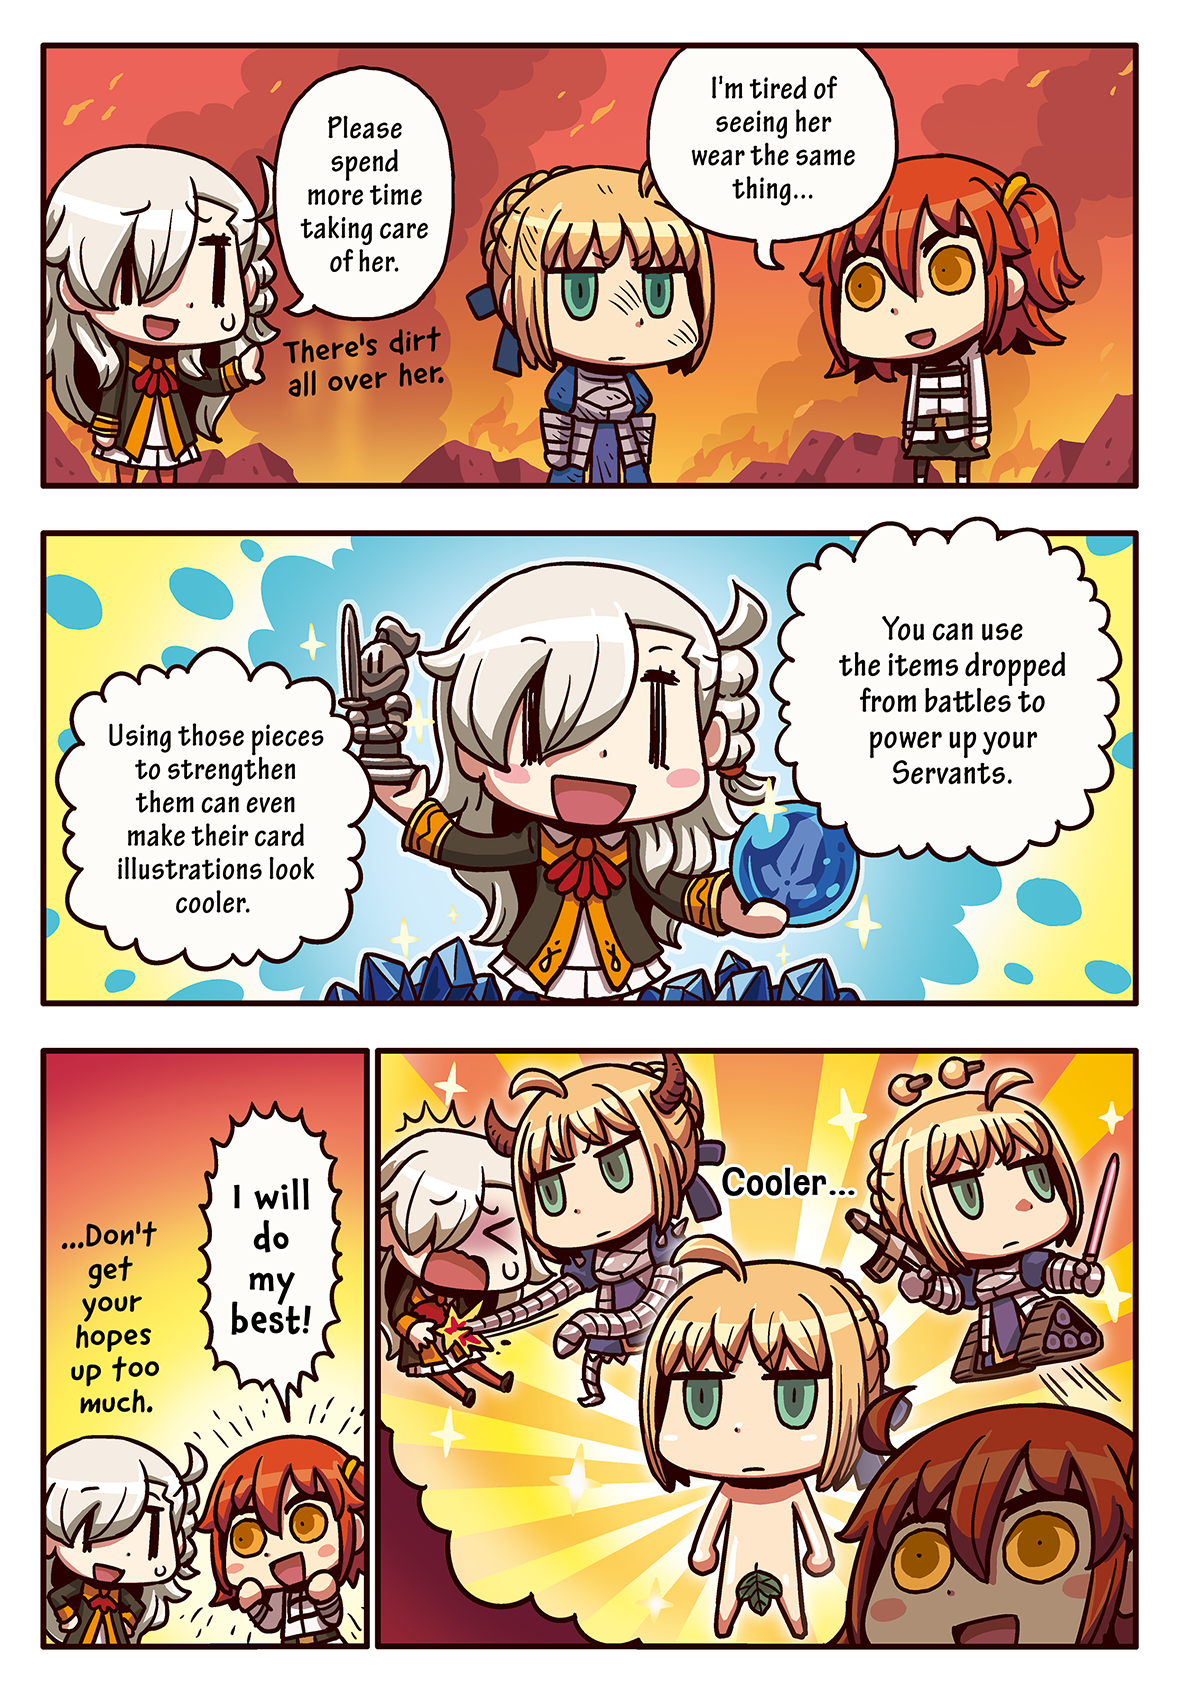 Episode 11 Enhance Your Servants Learning With Manga Fate Grand Order